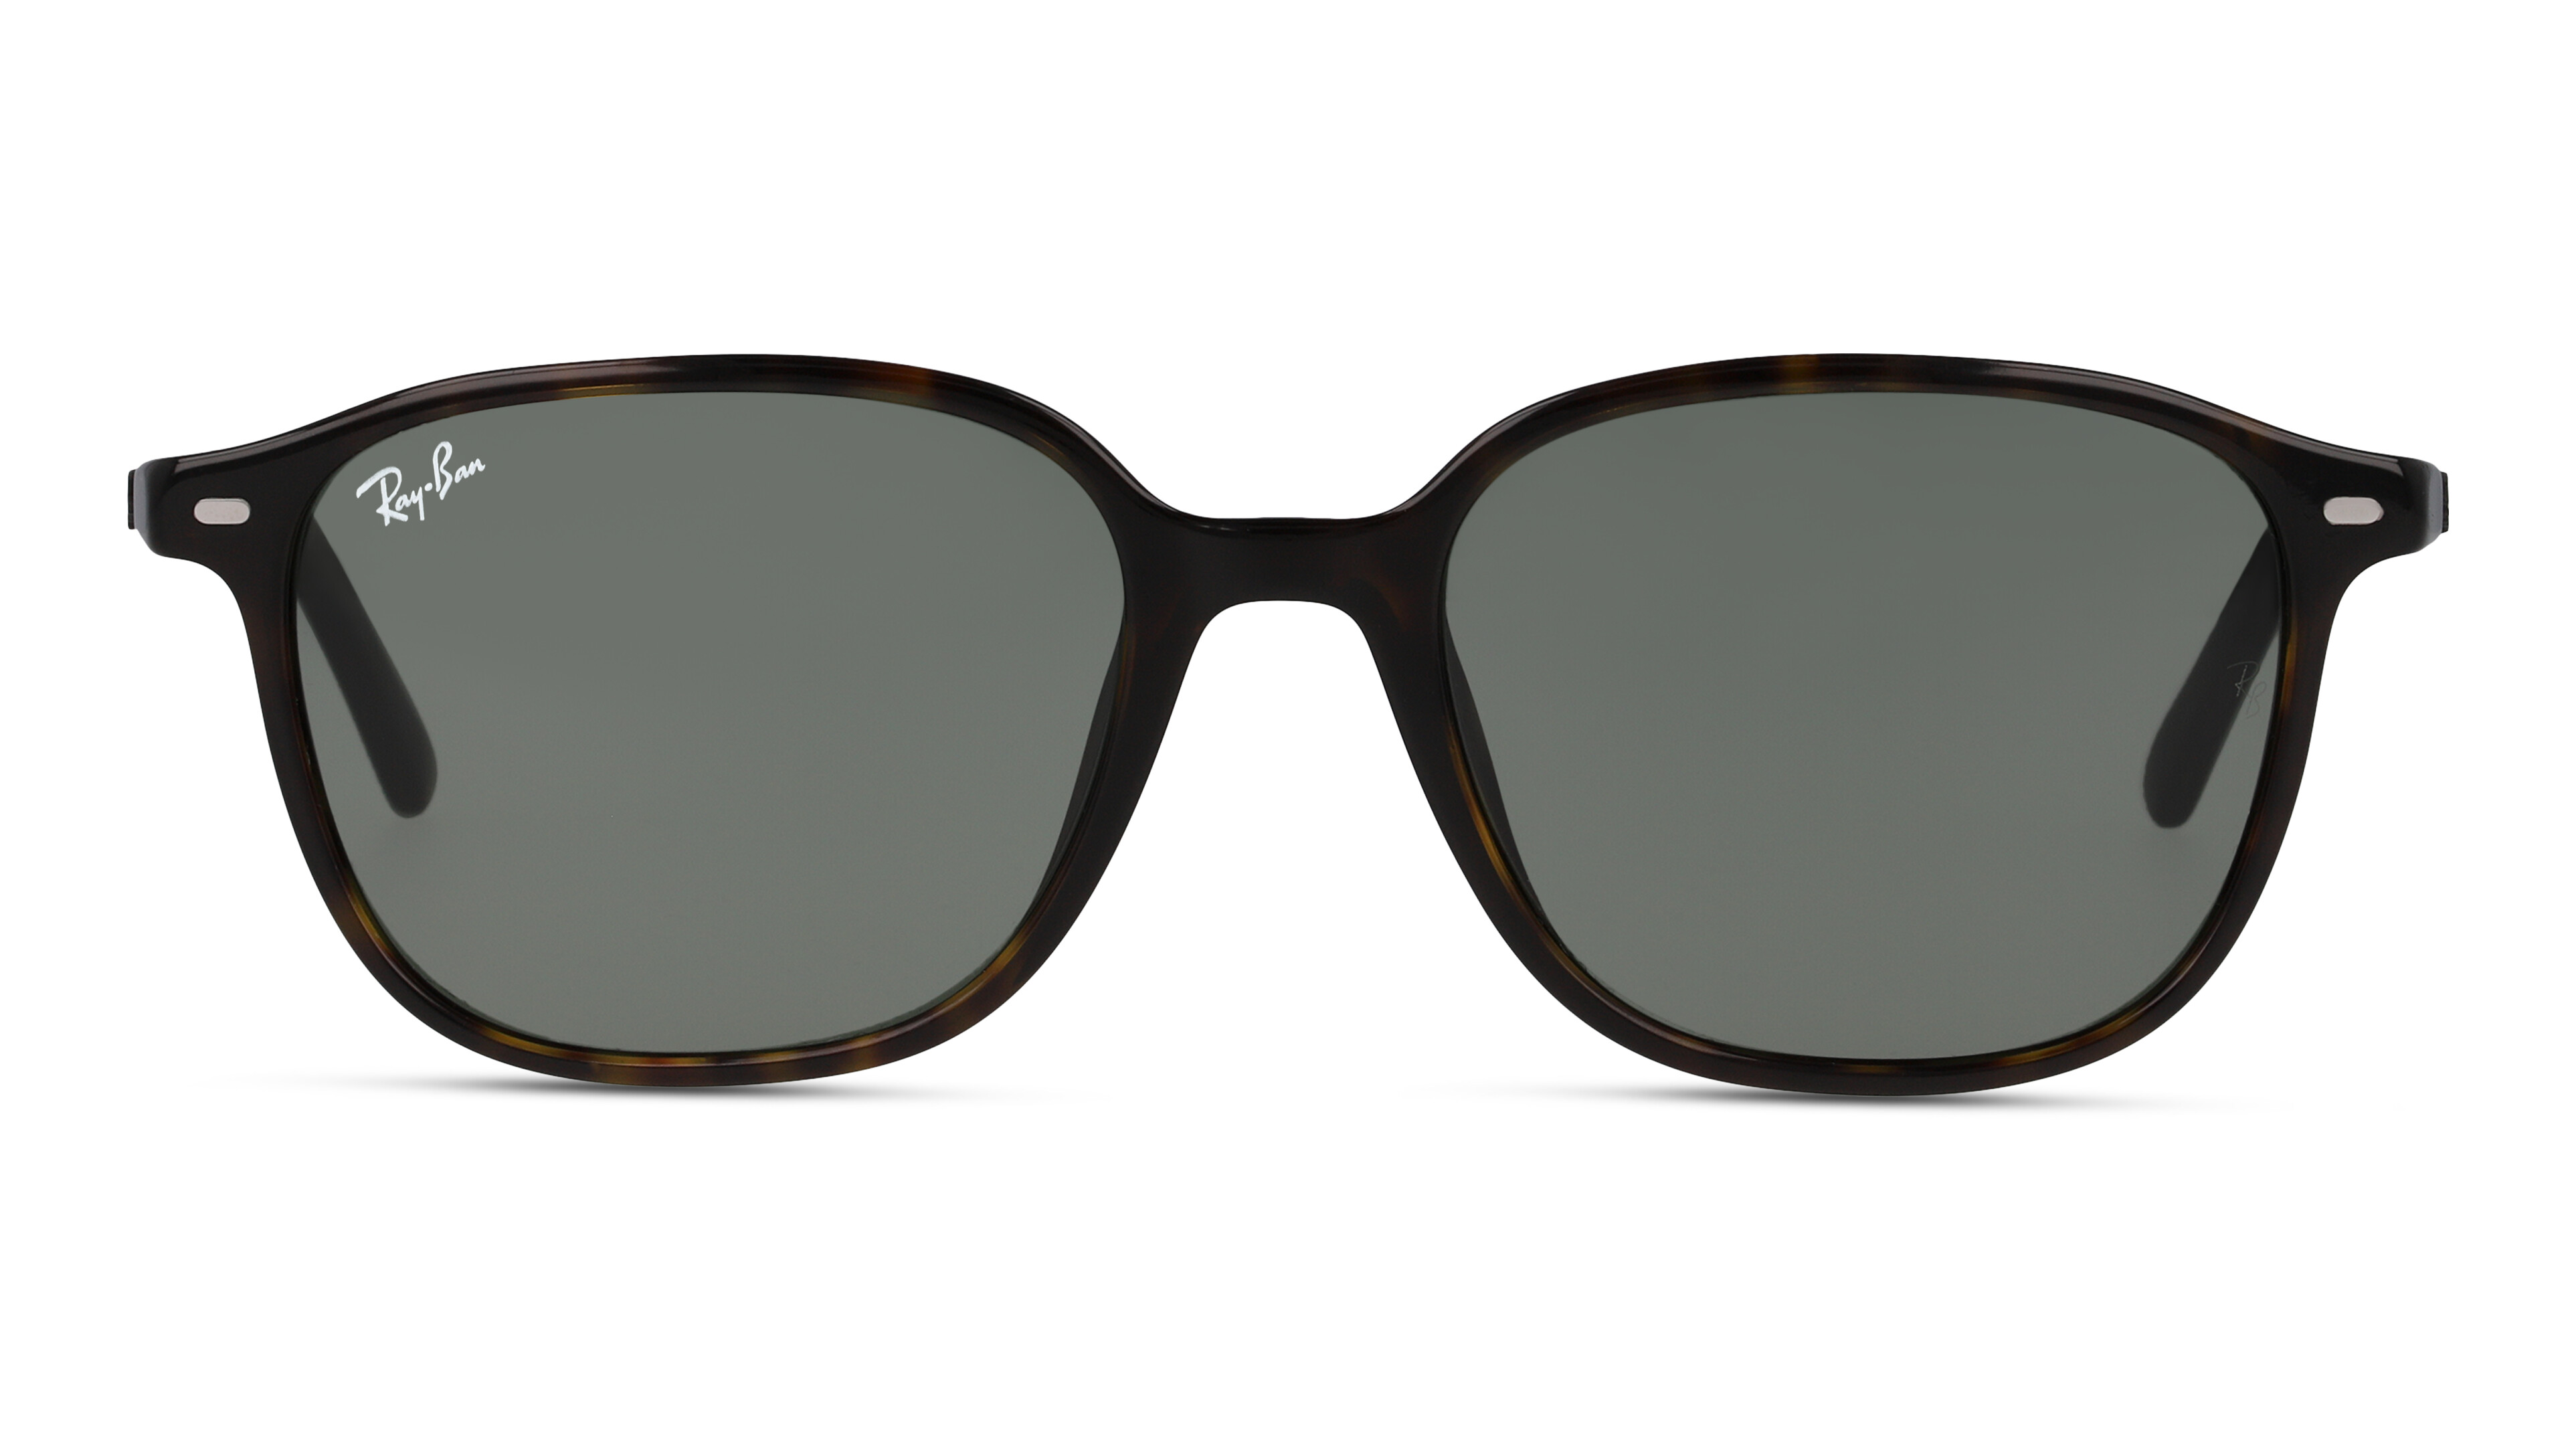 [products.image.front] Ray-Ban LEONARD 0RB2193 902/31 Sonnenbrille